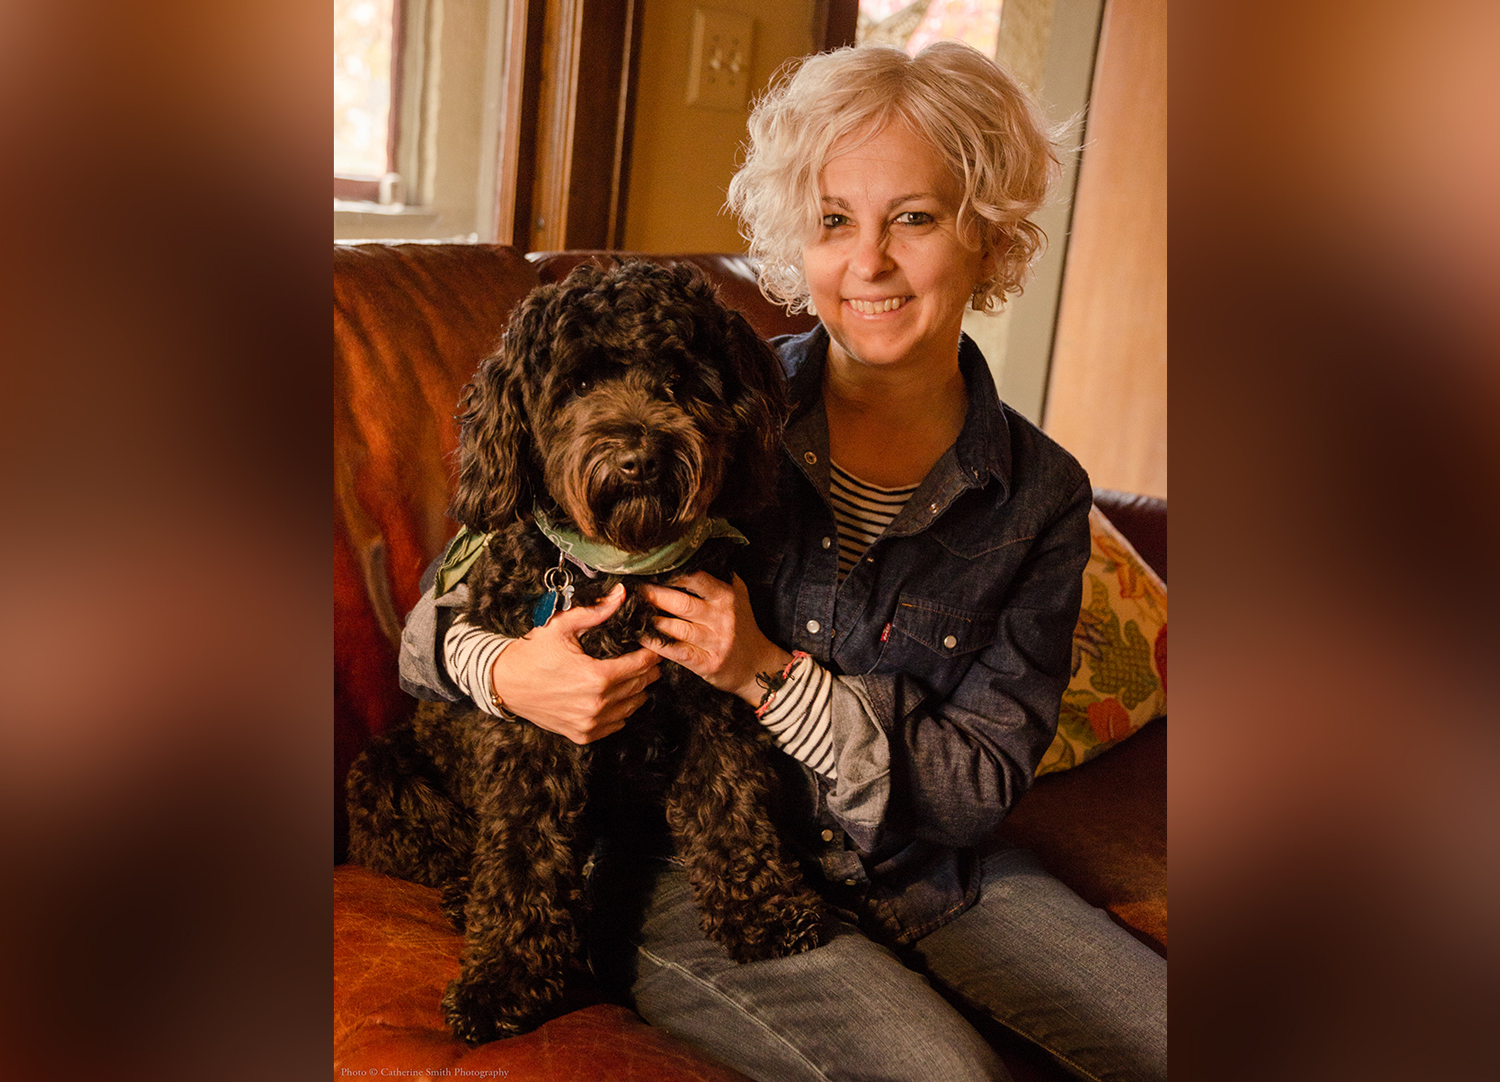 Kate DiCamillo sits on a couch with her arm around a black dog with curly fur.